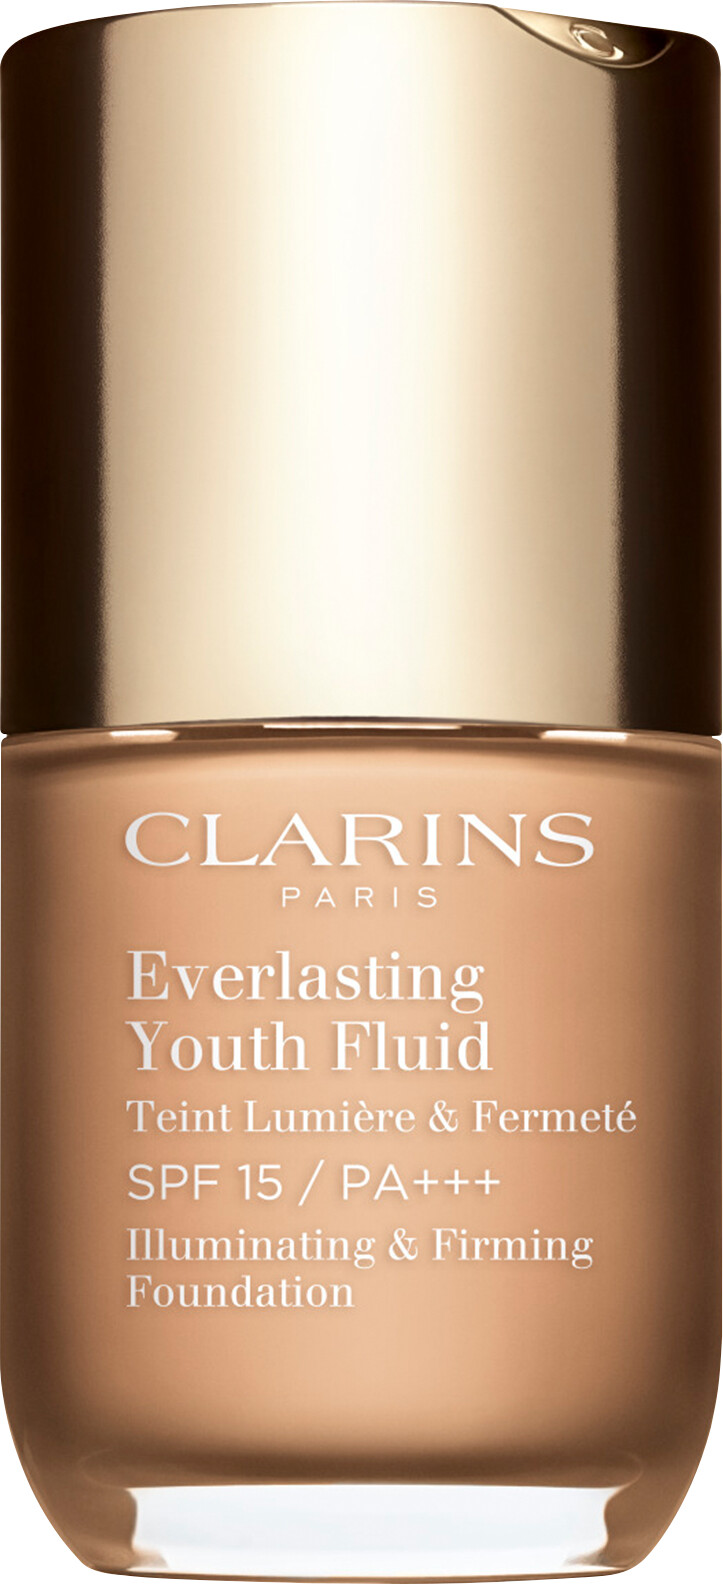 Clarins Everlasting Youth Fluid Illuminating and Firming Foundation SPF15 30ml 108.3 - Organza